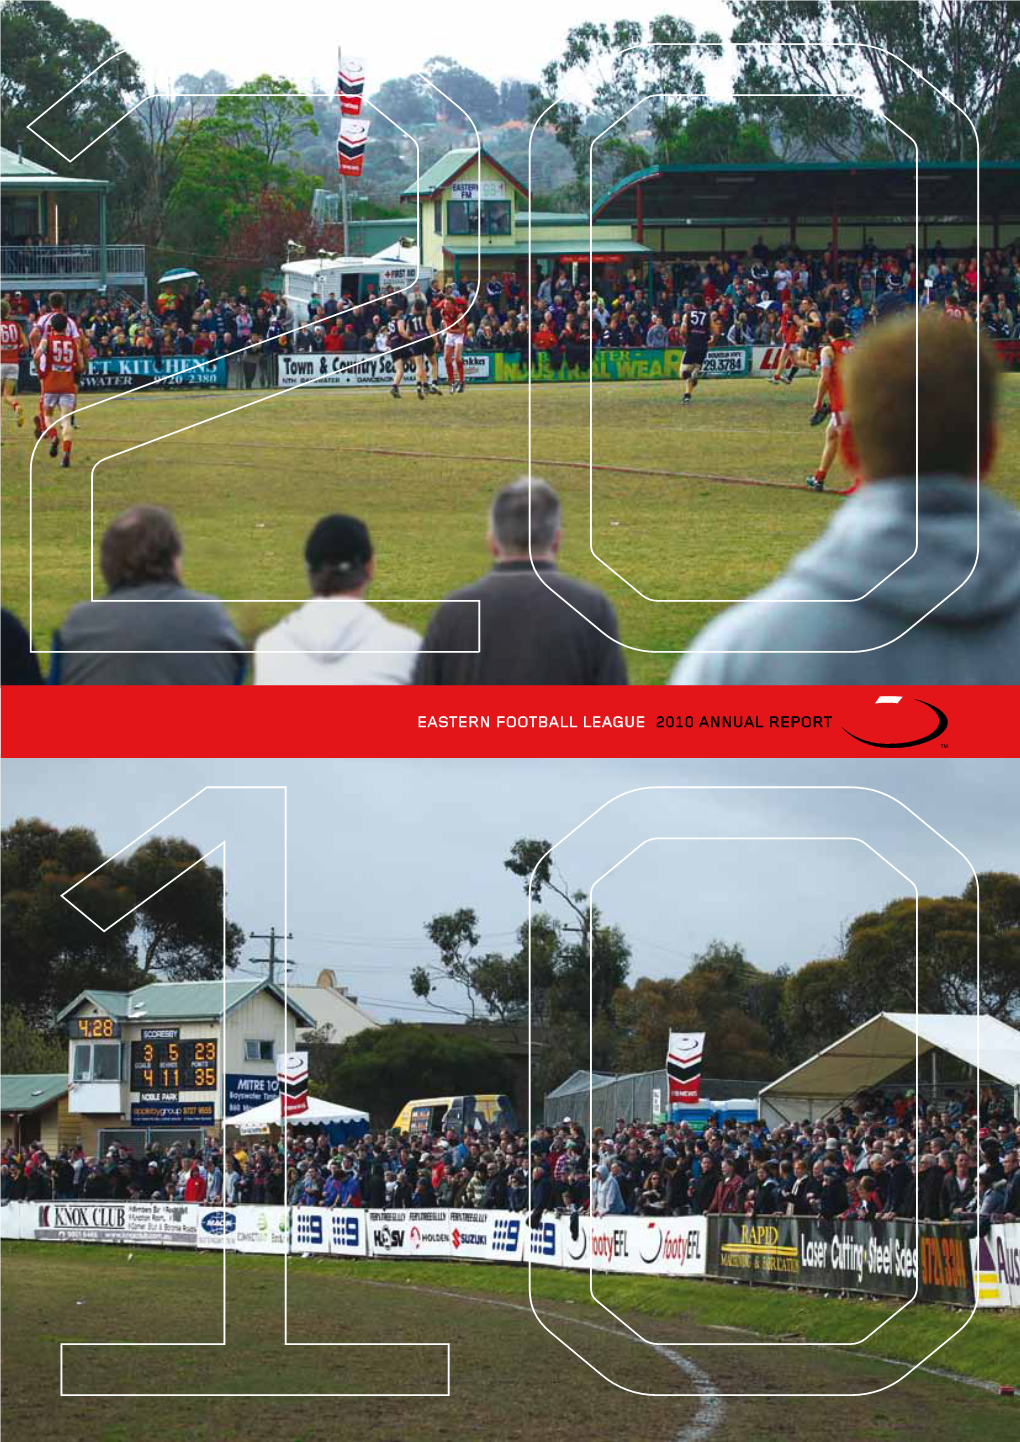 EASTERN FOOTBALL LEAGUE 2010 ANNUAL REPORT Contents